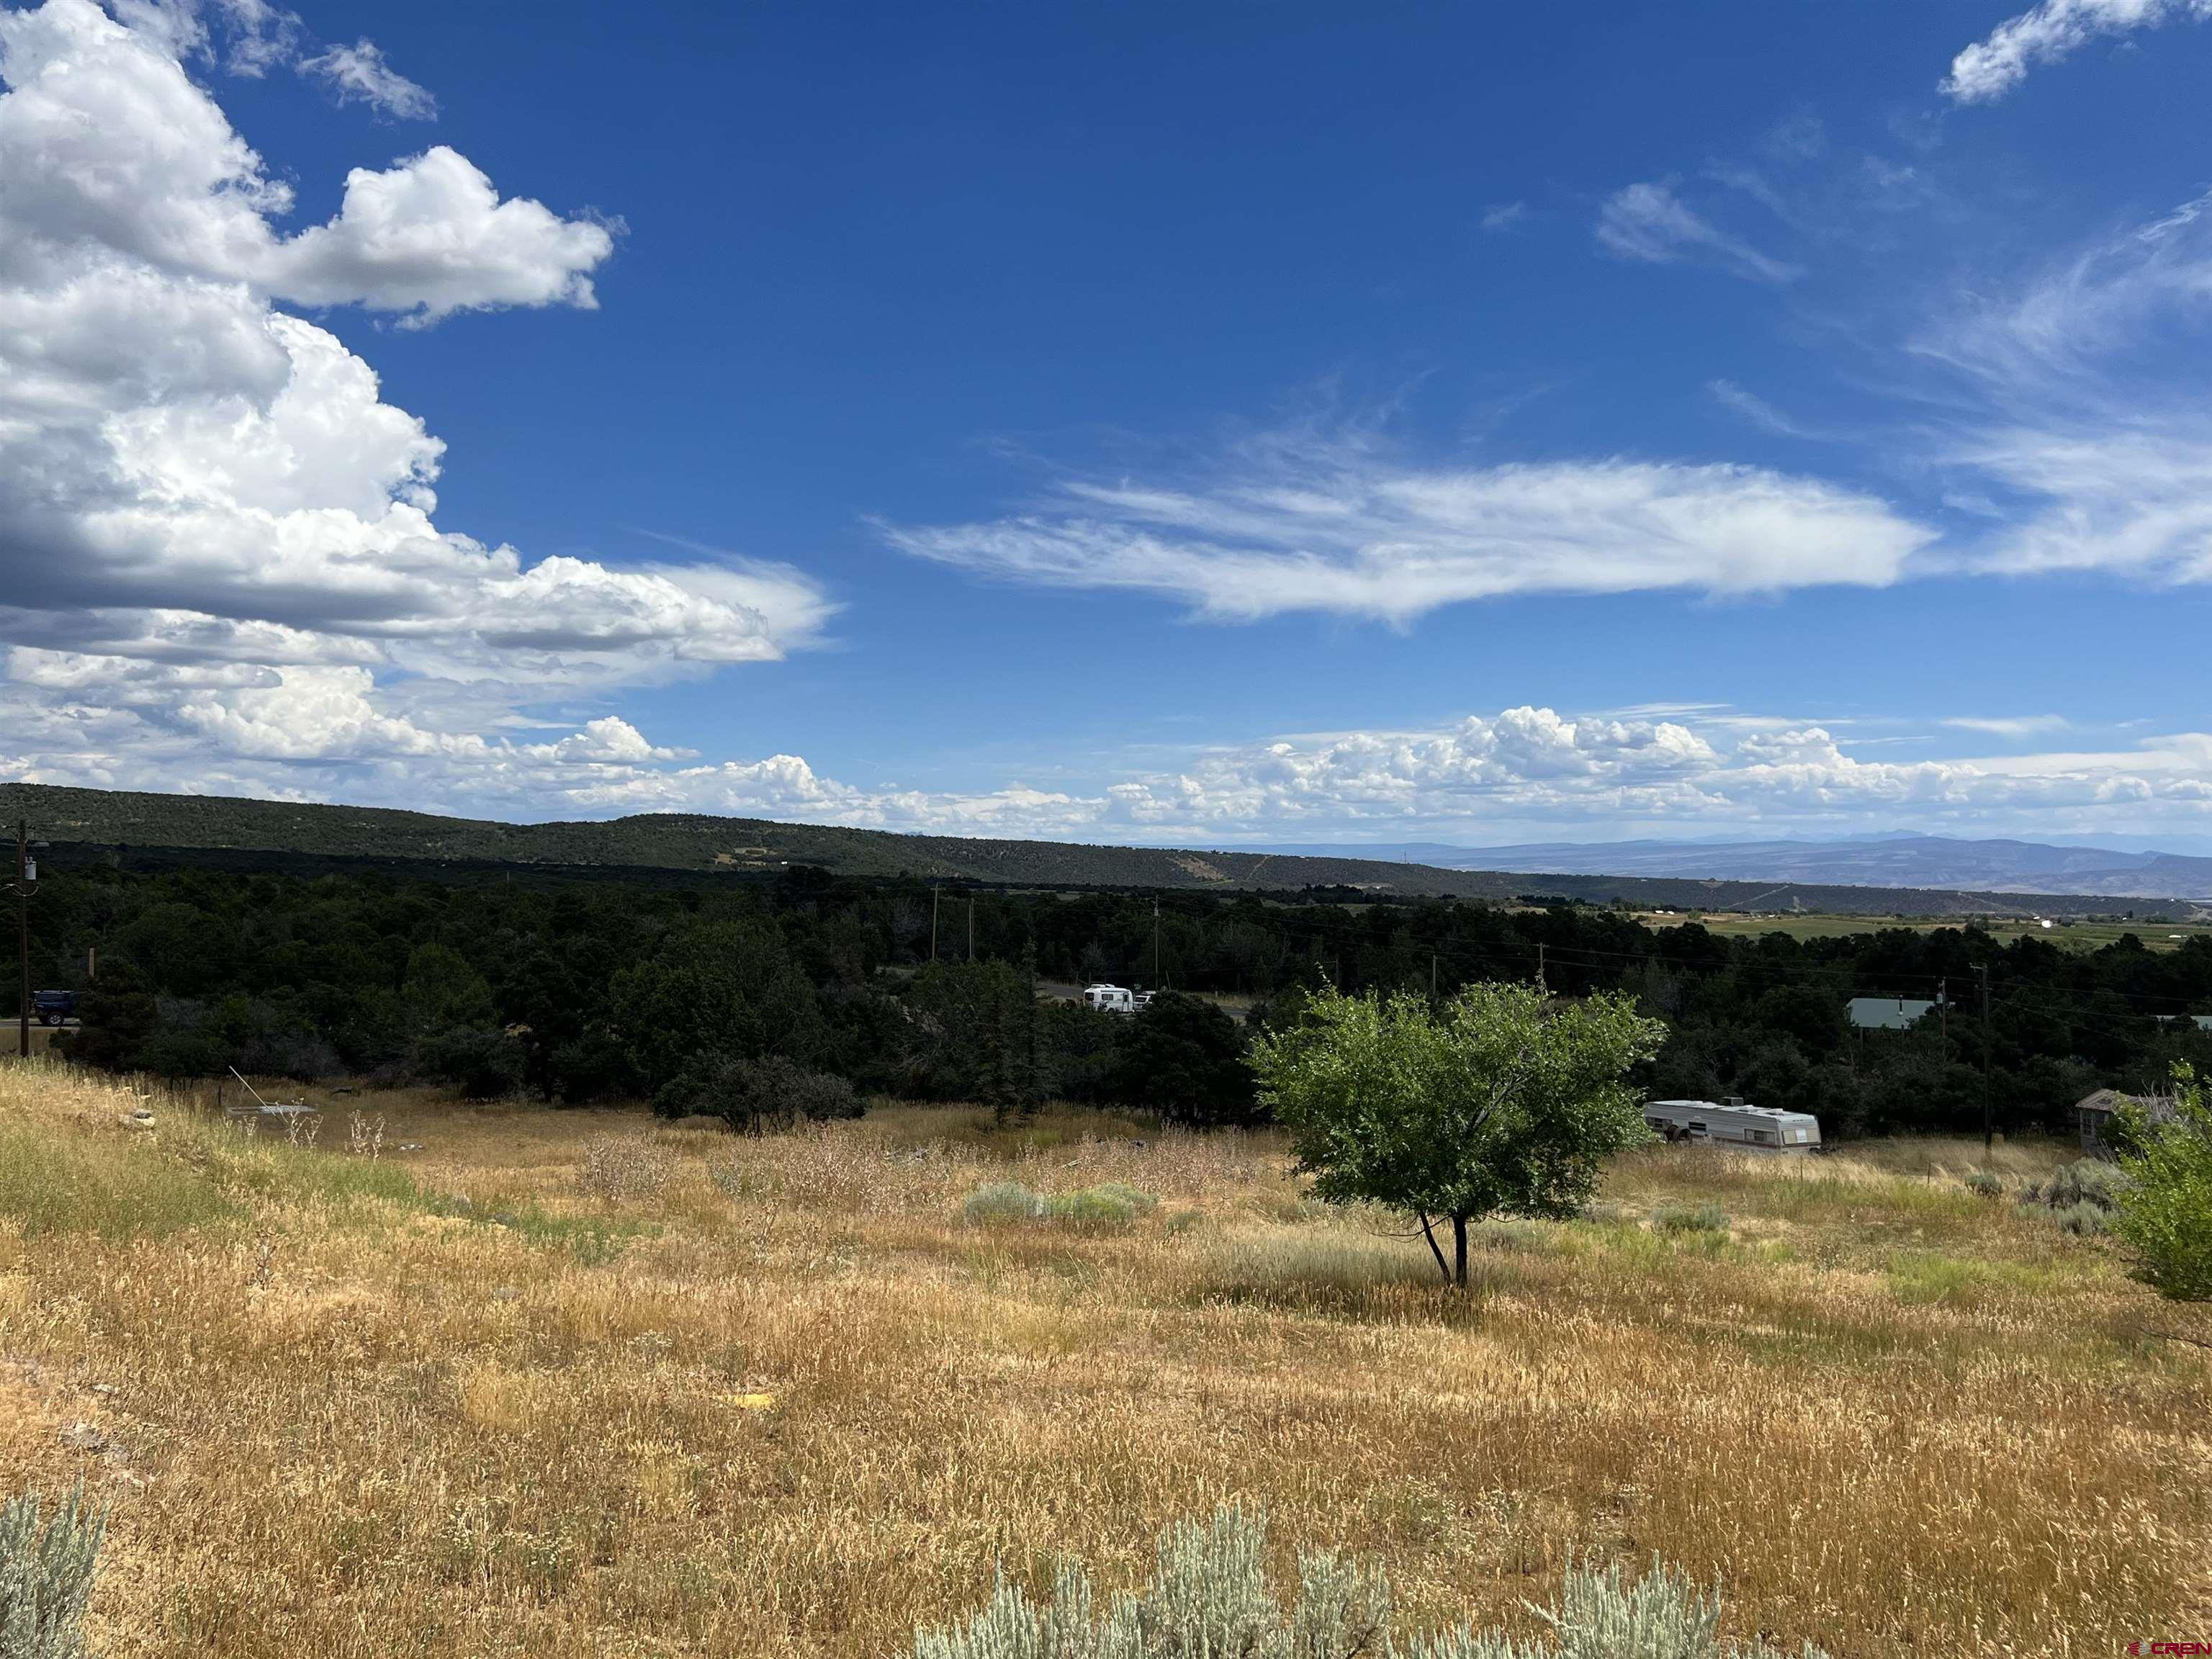 Five acres with great Grand Mesa views and paved road frontage. Property has several vehicles, buses and other debris but when cleaned up would make a great home site. Rolling terrain. With its proximity to the town of Cedaredge and Montrose being less than an hour away and Grand Junction about an hour and a half away you are within reach of airports shopping and more. This property is located at the base of the World famous Grand Mesa with its nearly one million acres of BLM land with nearly 360 lakes and reservoirs you can enjoy endless recreational activities.  Powderhorn Ski resort is a scenic drive up and over the Mesa. Excellent hunting and fishing is to be had with all of the public lands and lakes and rivers for you to enjoy!  PROPERTY HAS THREE STREET ADDRESSES AS FOLLOWS, 20567, 20557 & 20563 HWY 65